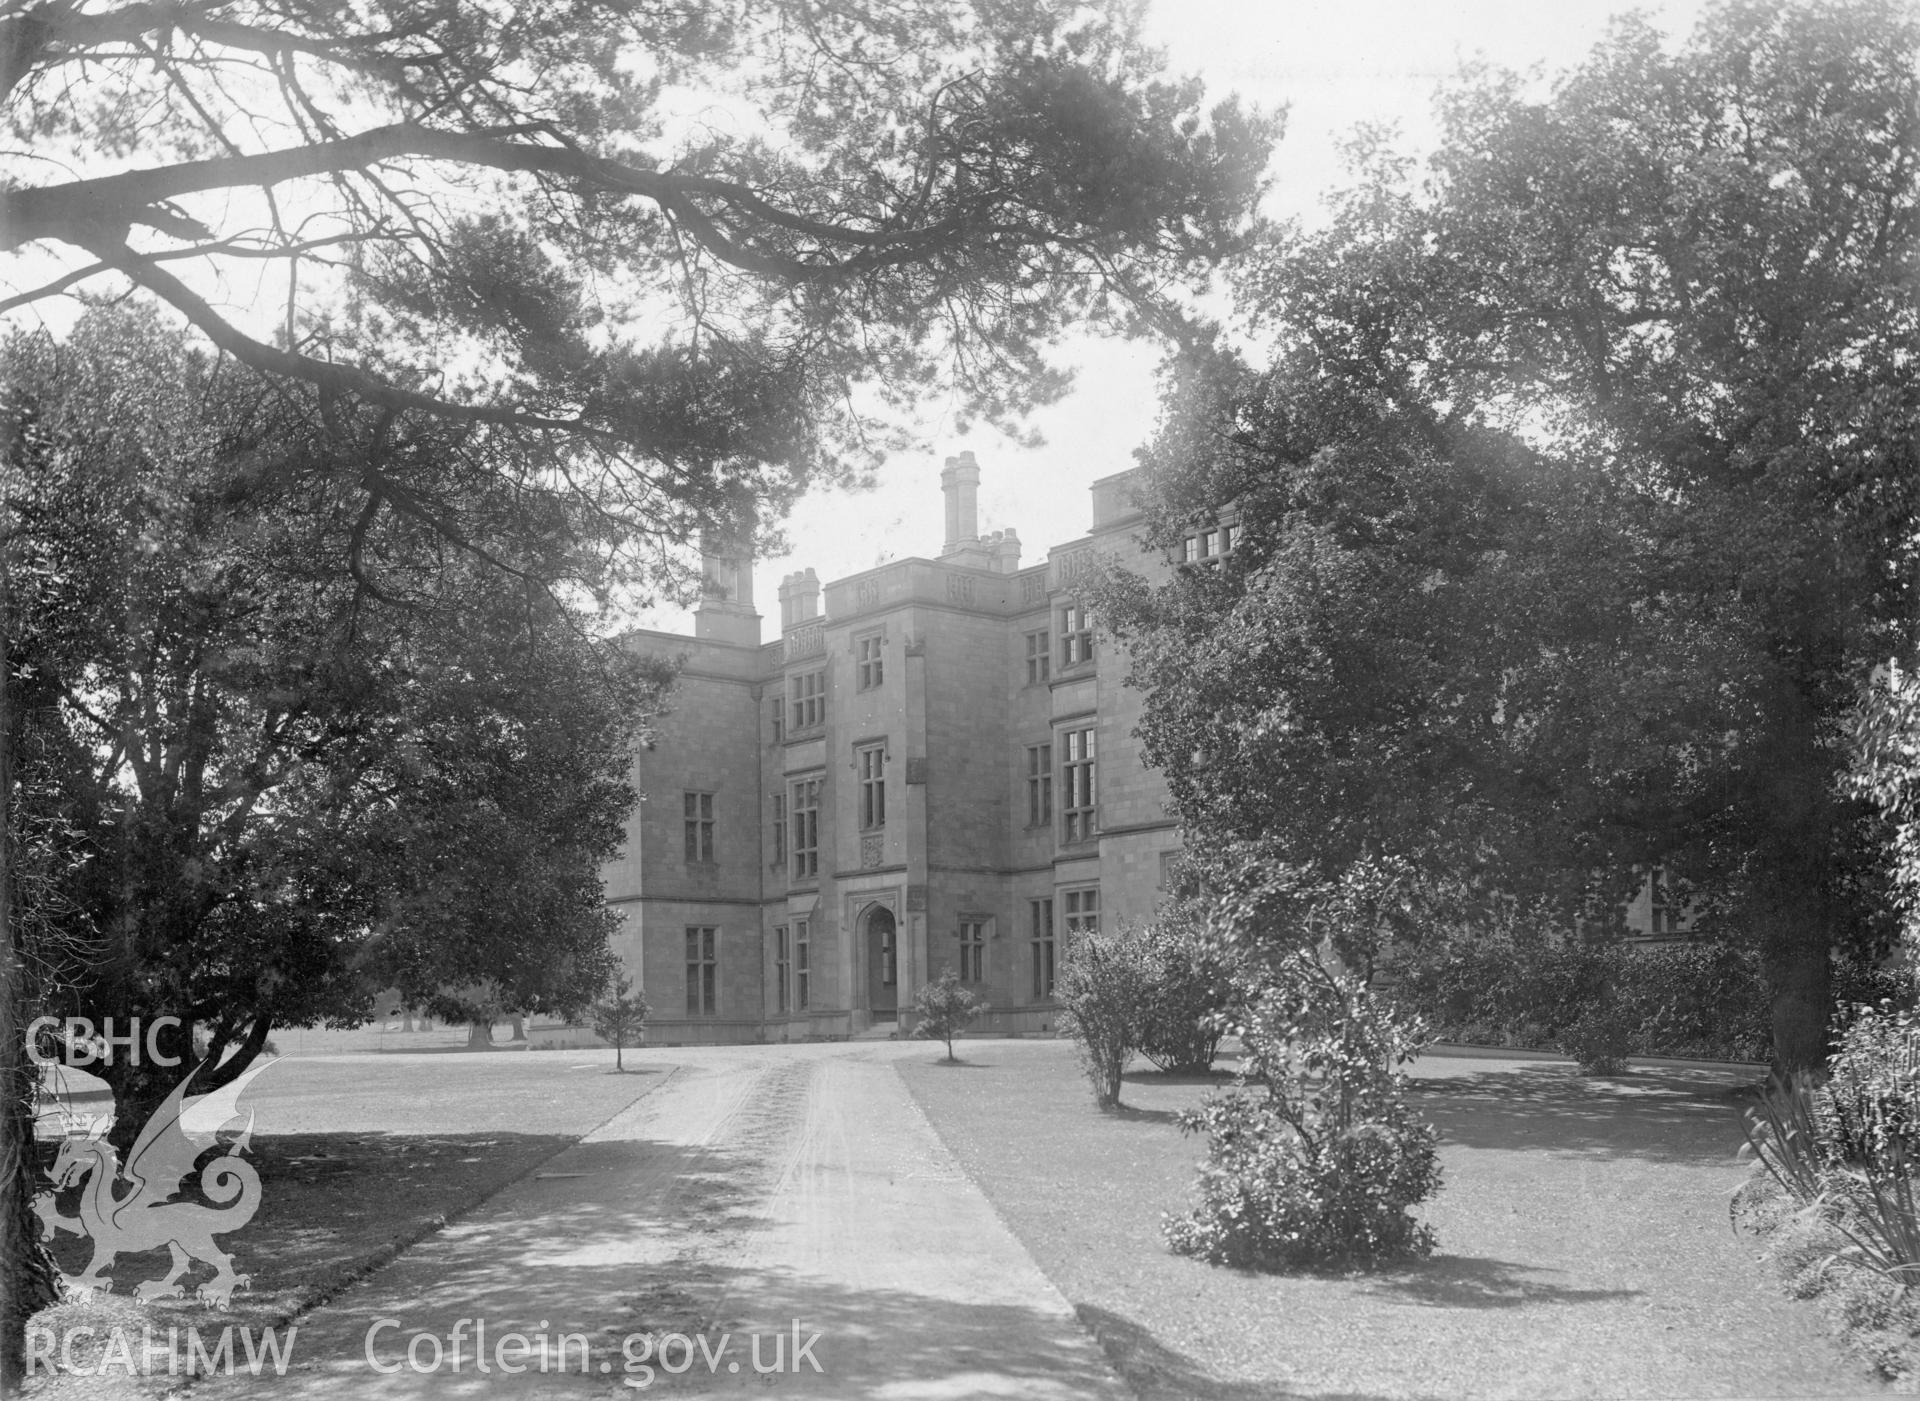 Digital copy of a black and white photograph showing Llanover House, December 1901.